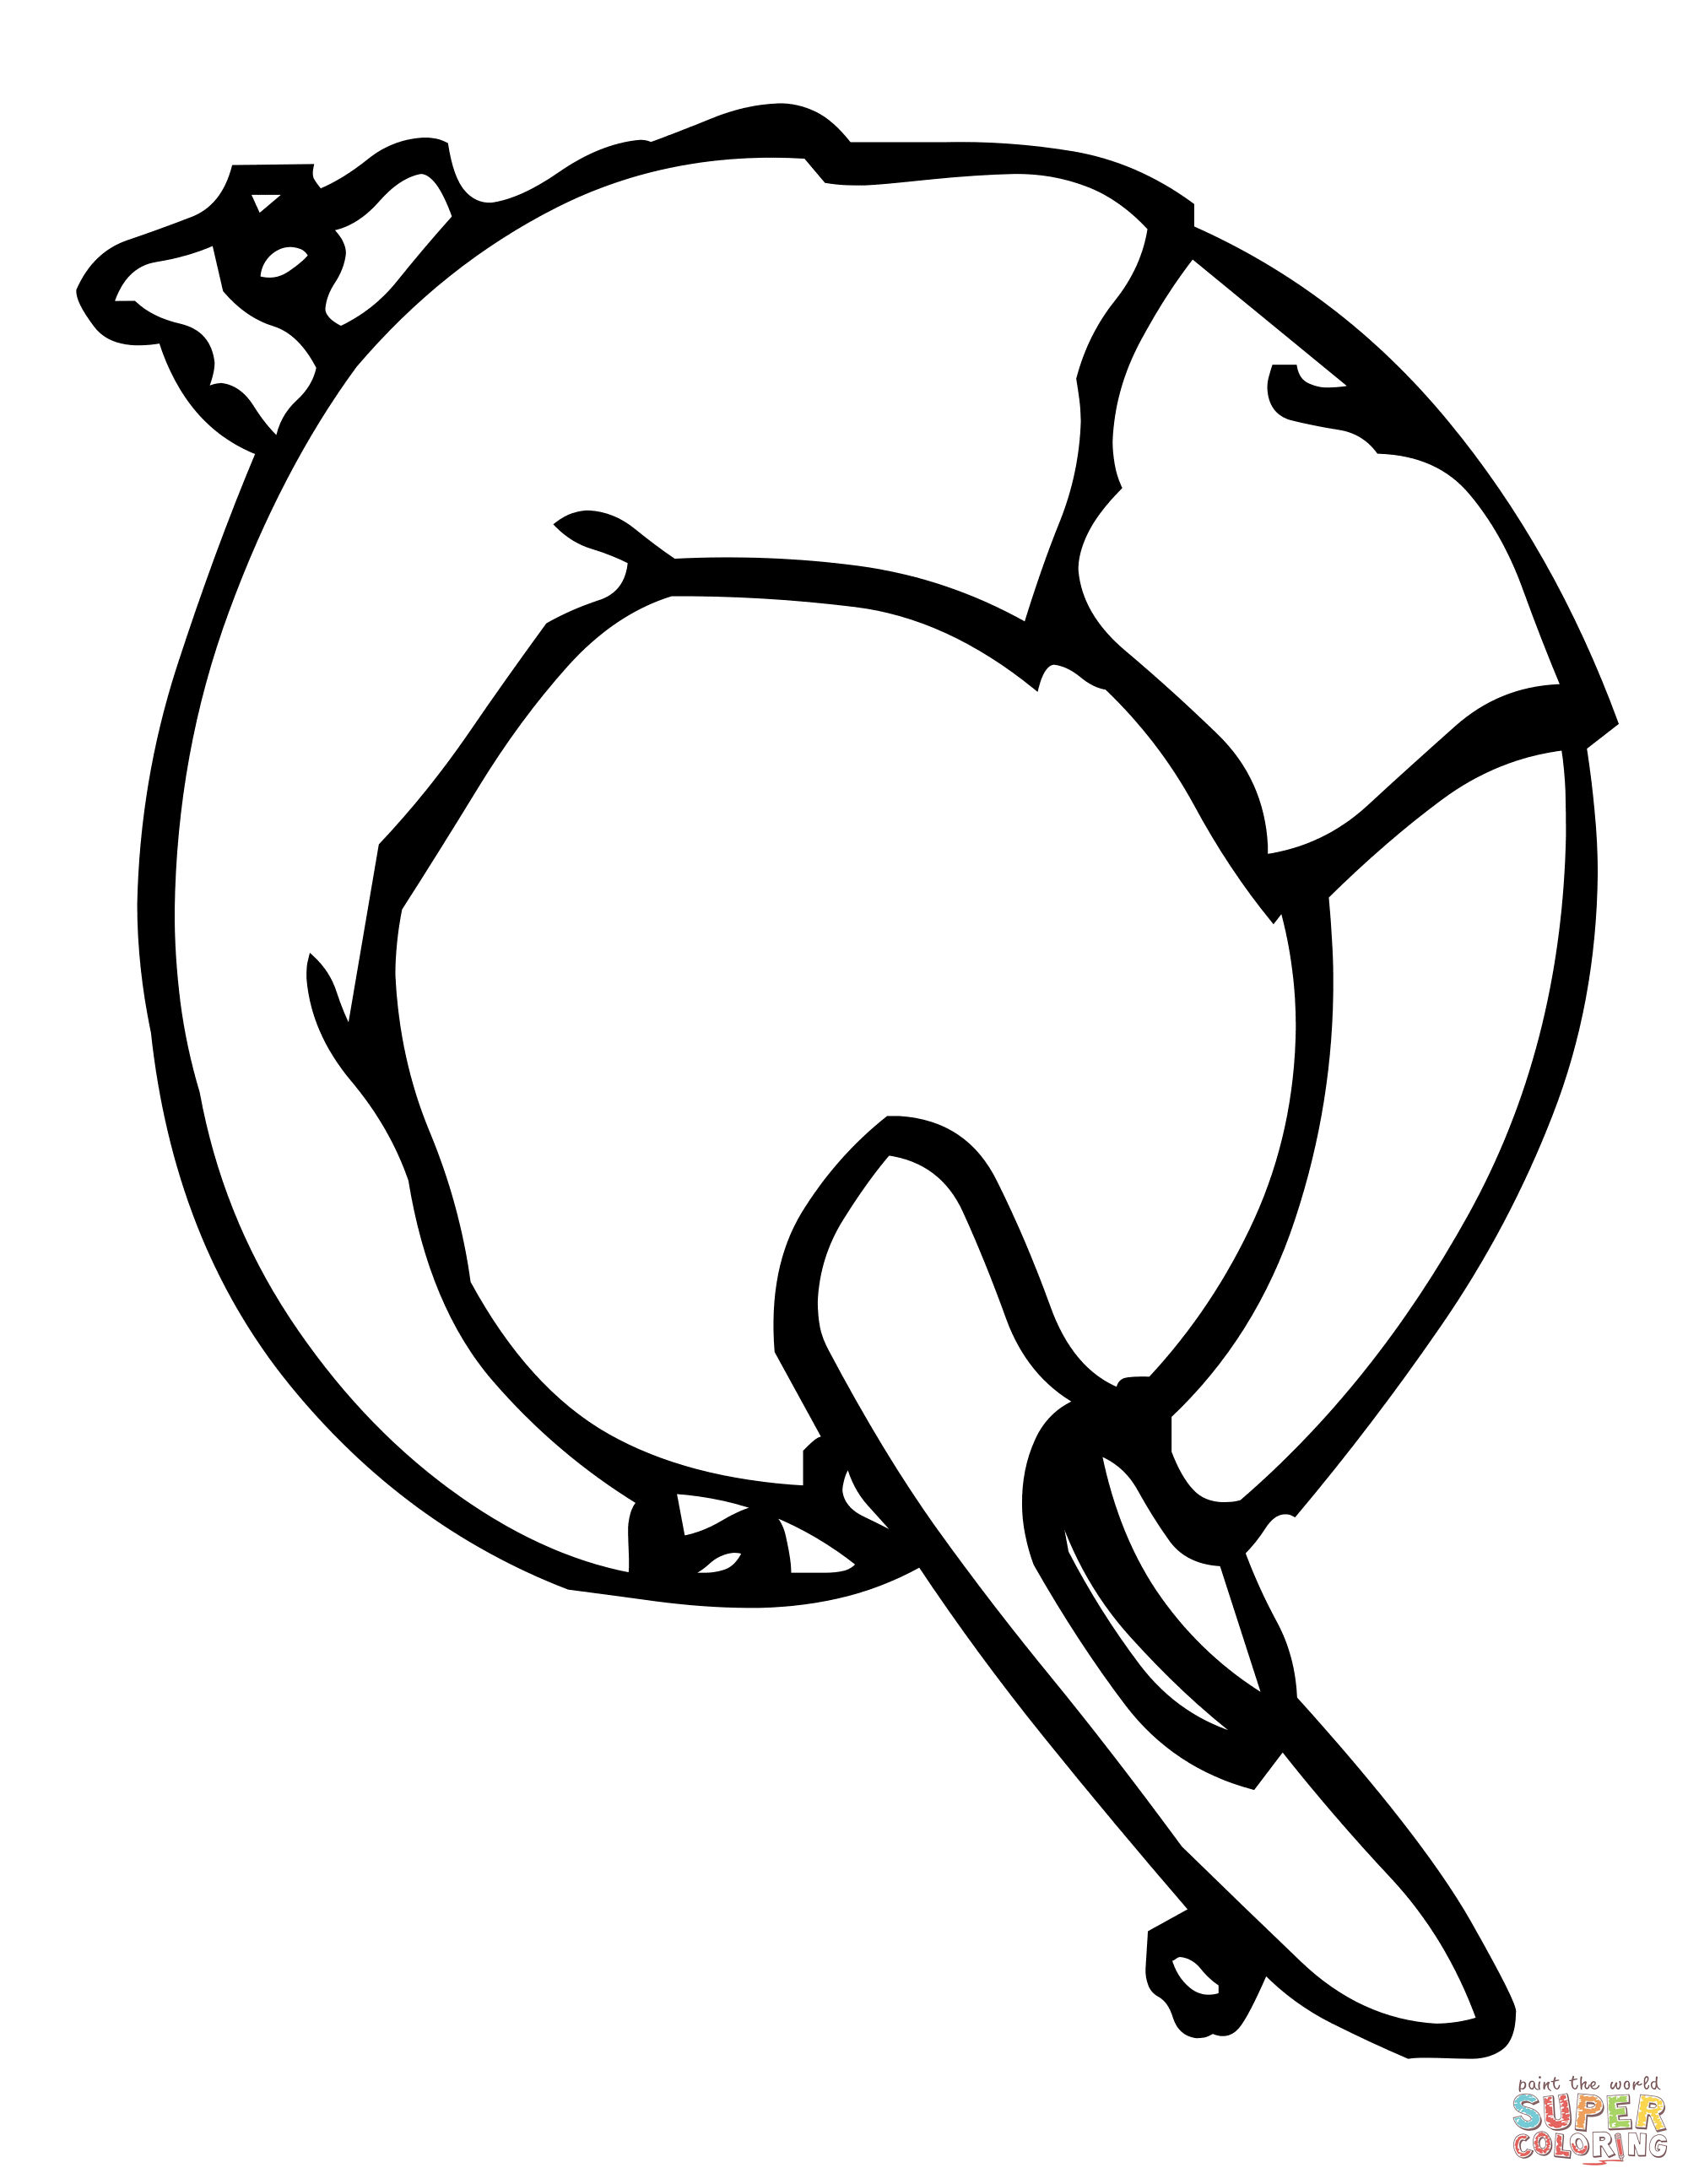 Skateboard Letter Q Coloring Pages